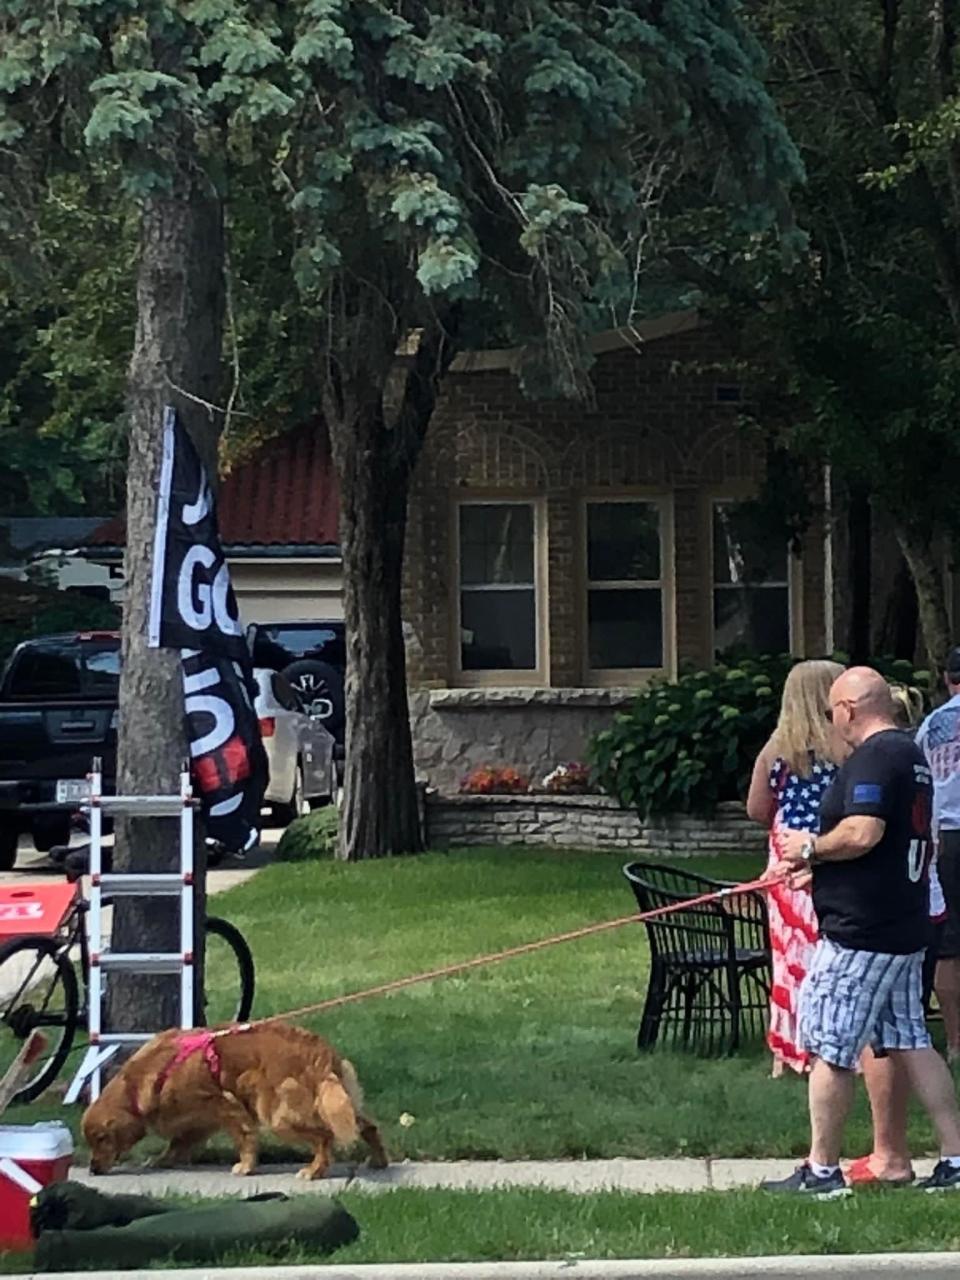 The flag hanging on the tree at village of Hartland trustee Tom Truttschel's home during the Hometown Celebration parade on June 26.